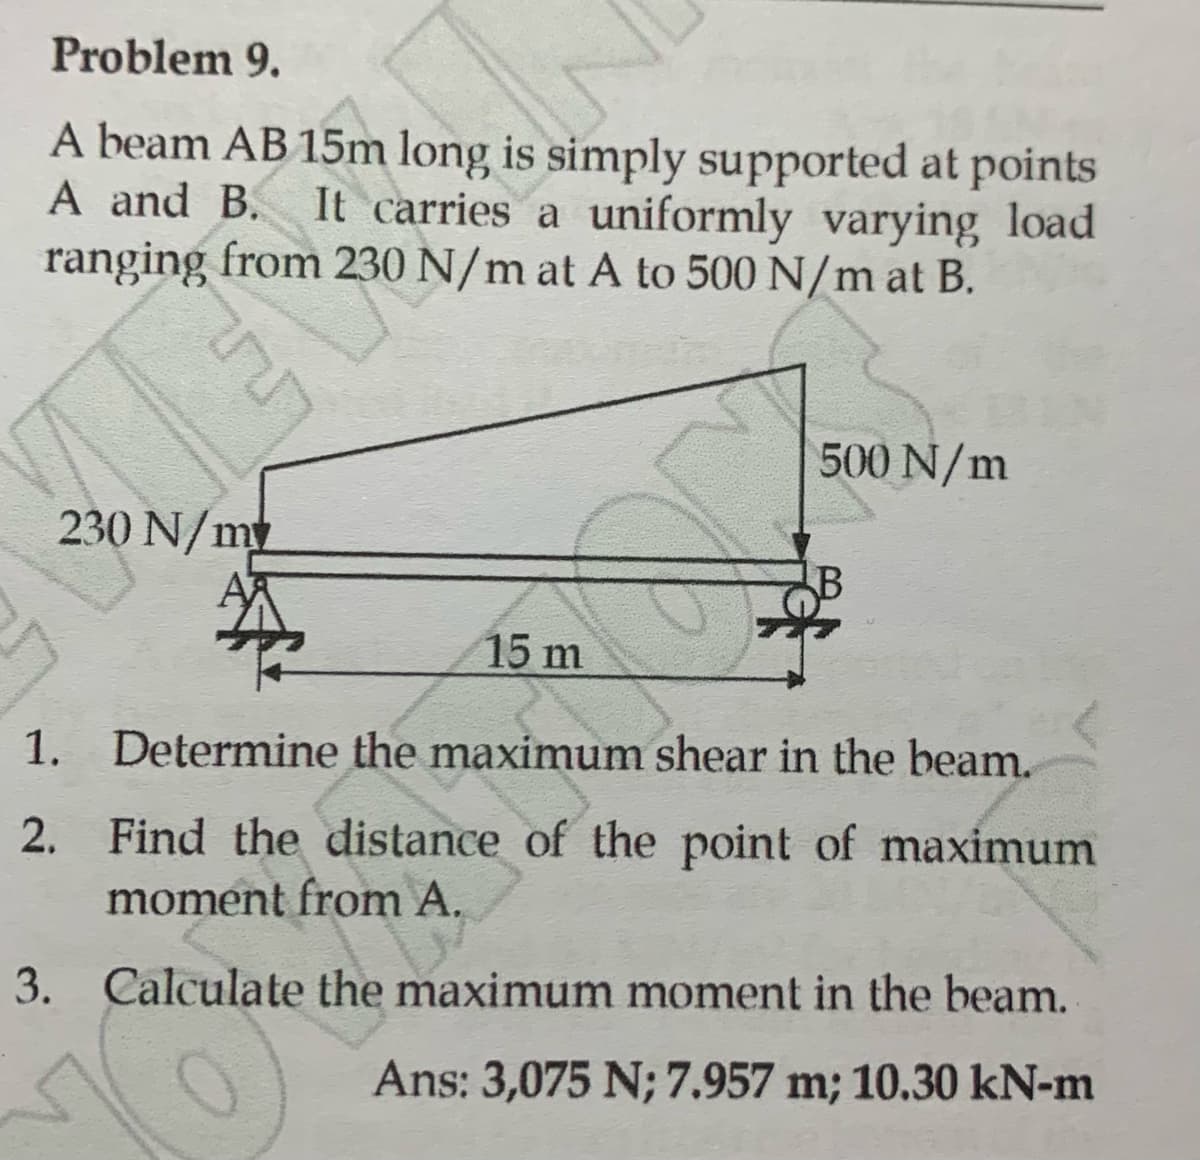 Problem 9.
A beam AB 15m long is simply supported at points
A and B. It carries a uniformly varying load
ranging from 230 N/m at A to 500 N/m at B.
LEV
230 N/m
1.
2.
N
♡
500 N/m
15 m
Determine the maximum shear in the beam.
Find the distance of the point of maximum
moment from A.
3. Calculate the maximum moment in the beam.
Ans: 3,075 N; 7.957 m; 10.30 kN-m